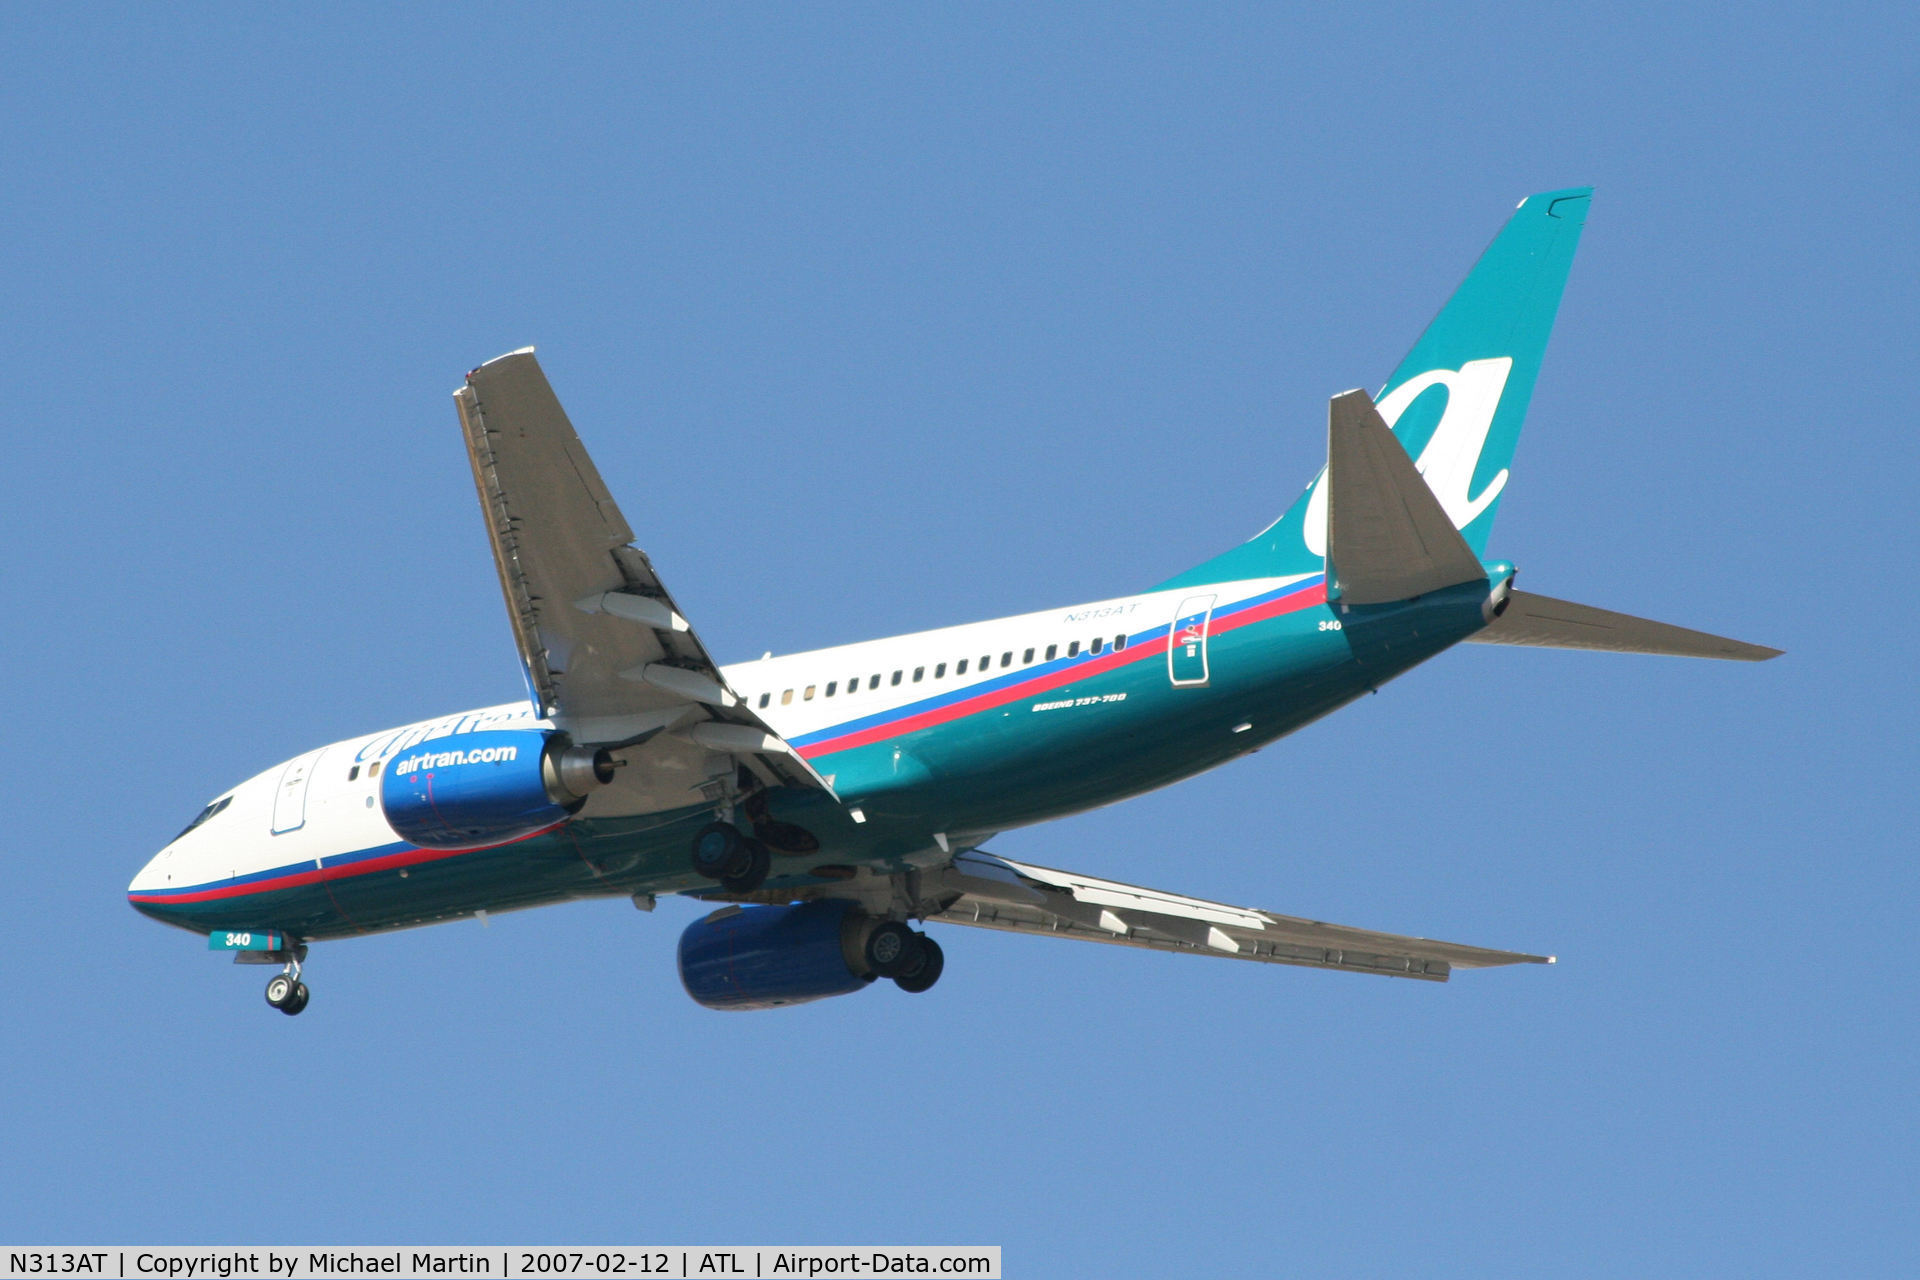 N313AT, 2007 Boeing 737-7BD C/N 33927, Over the numbers of 26L